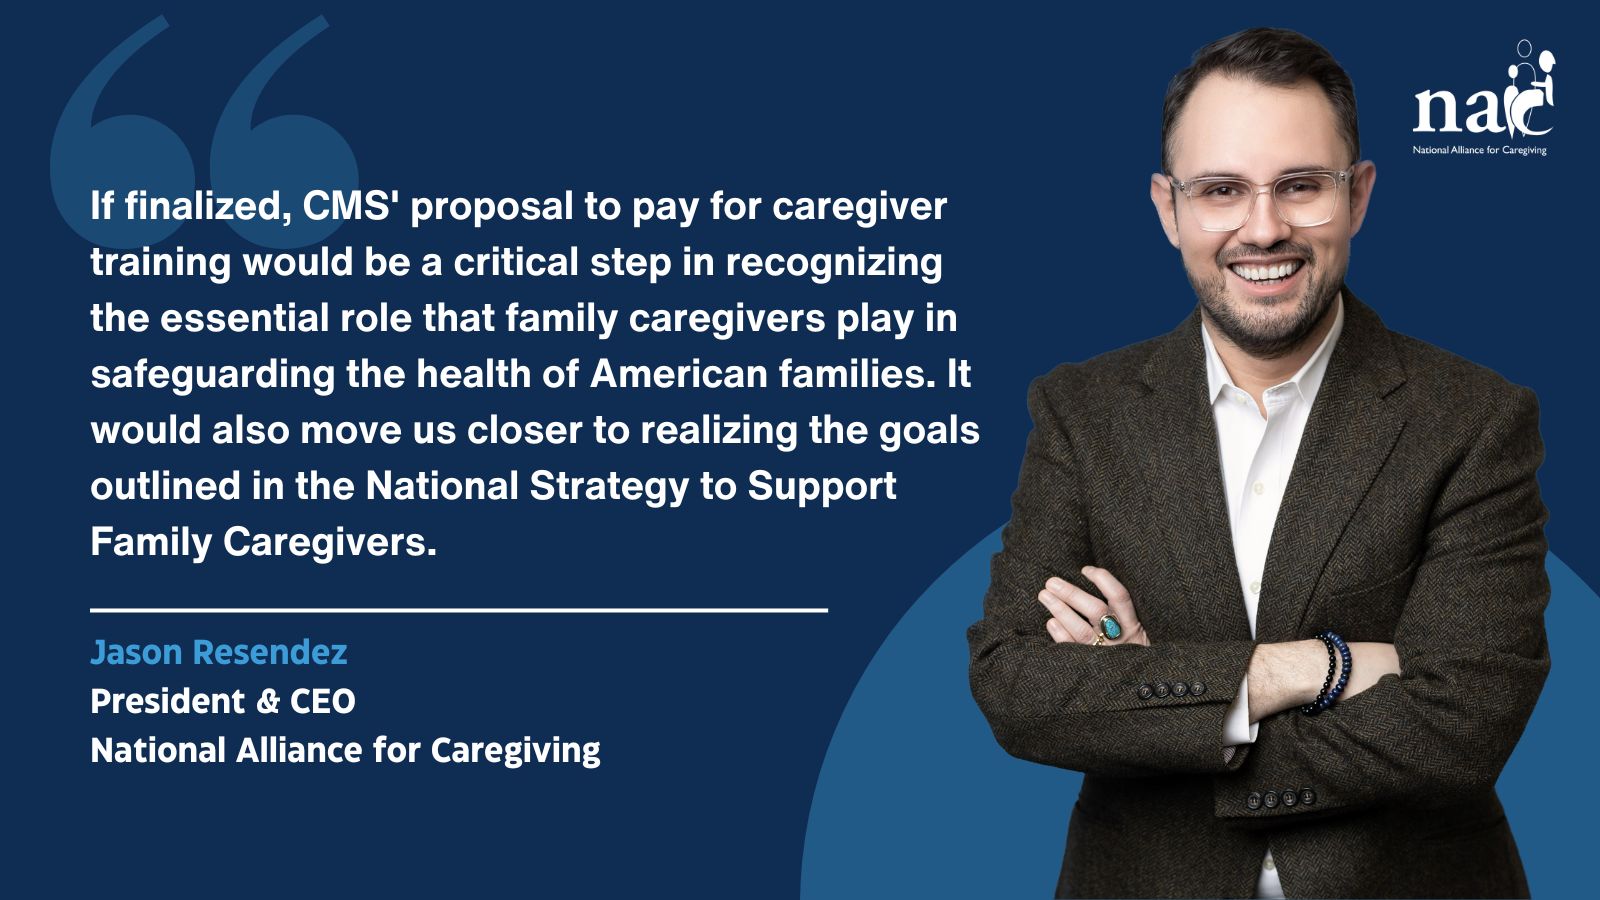 NAC Applauds Proposed Medicare Rule Change to Support Training for Family Caregivers